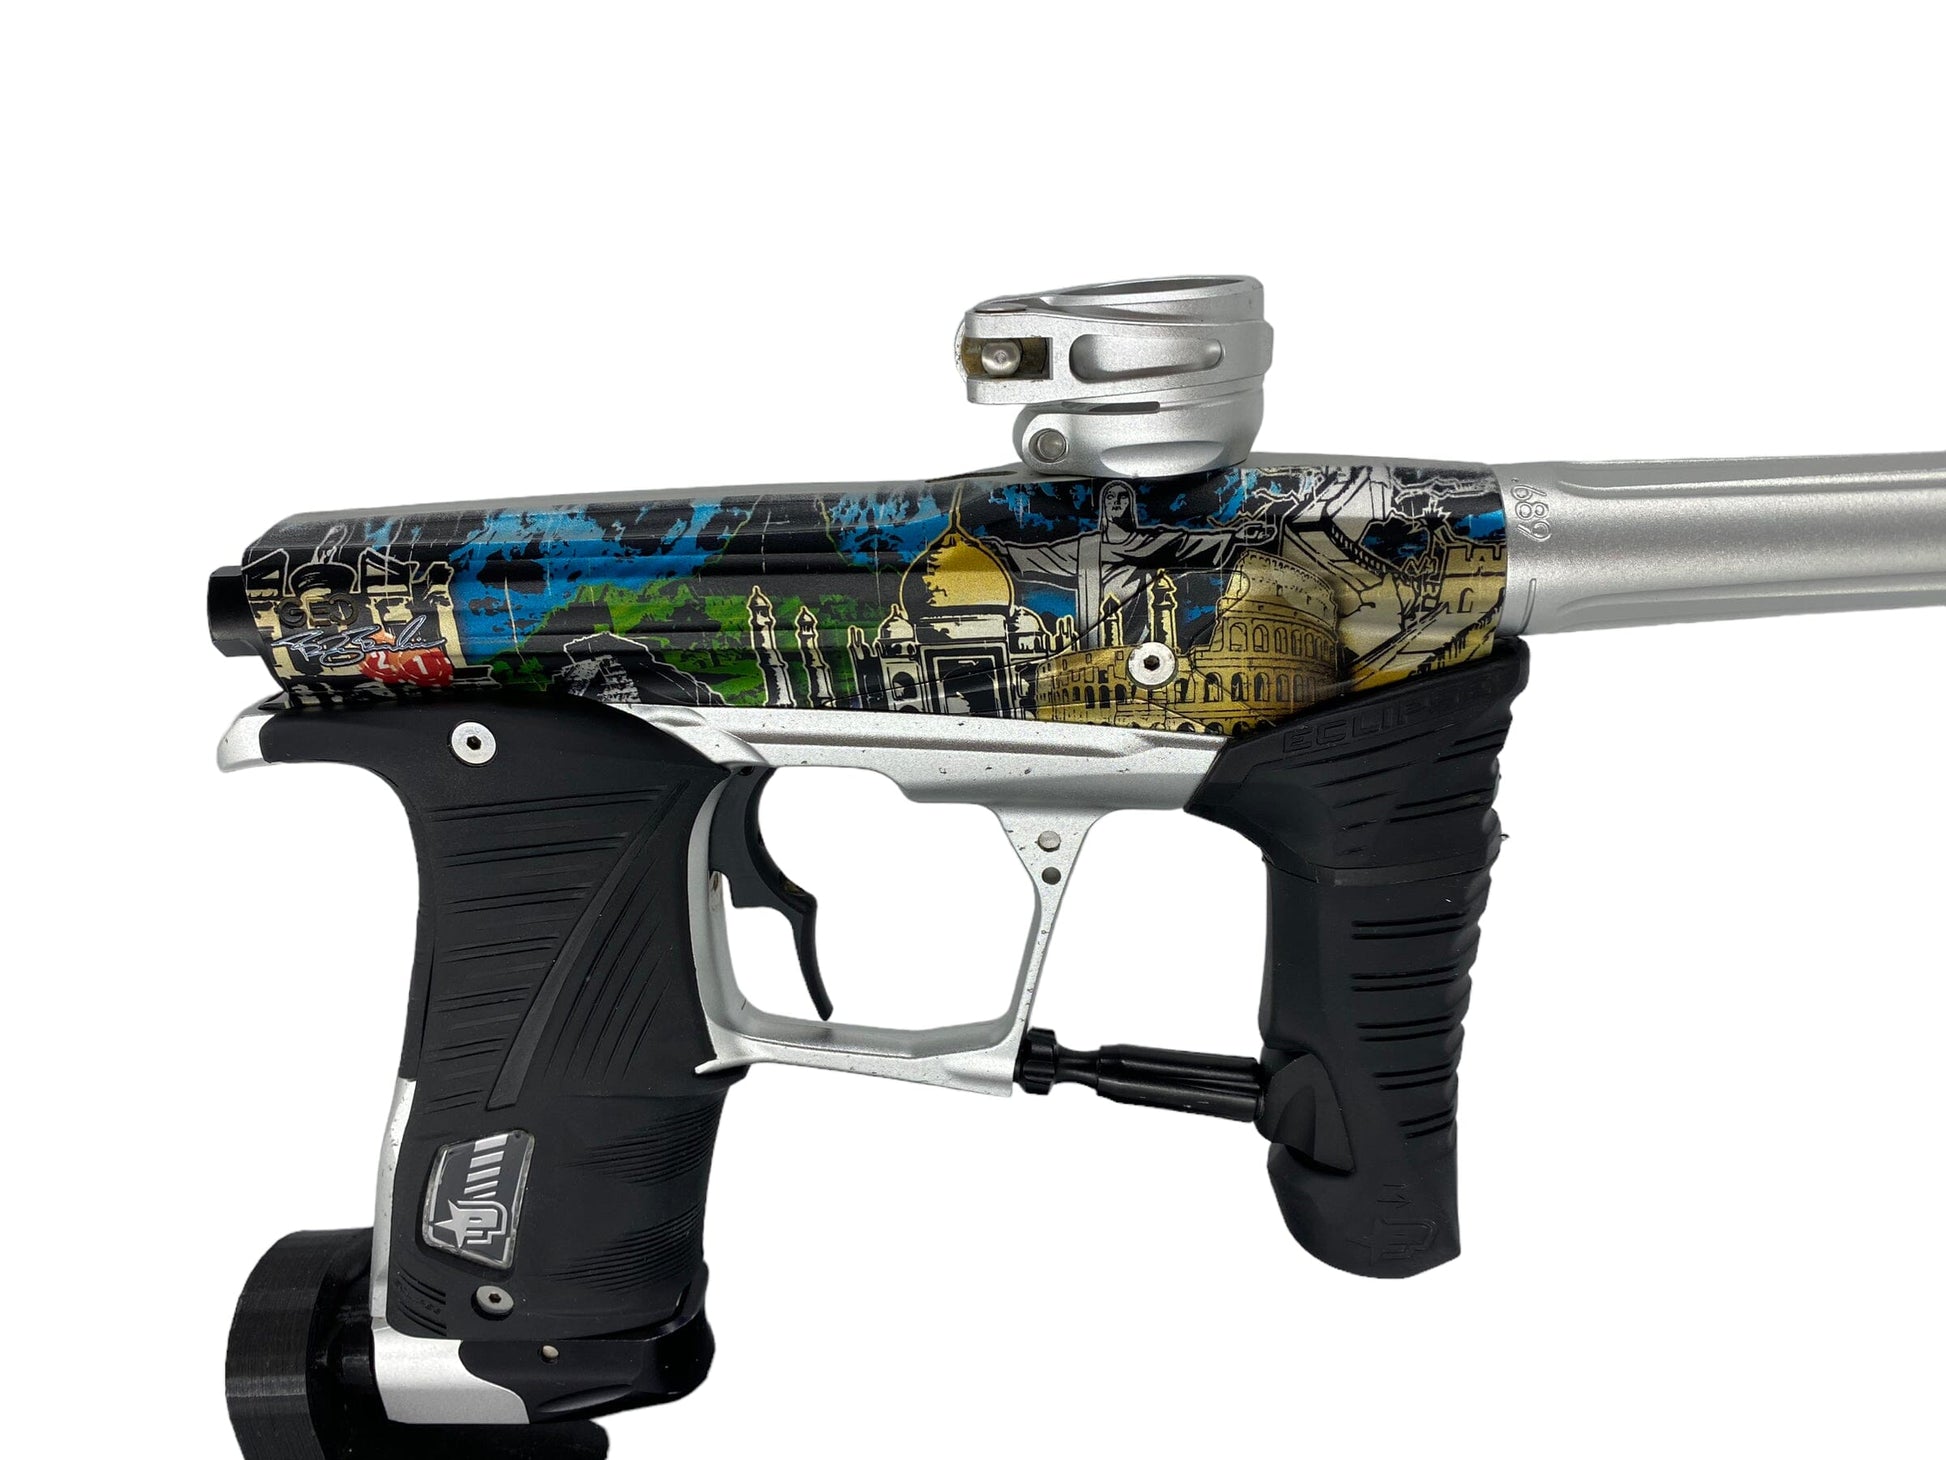 Used Planet Eclipse Geo 3.1 Billy Bernacchia's Custom Pro Edition Paintball Gun from CPXBrosPaintball Buy/Sell/Trade Paintball Markers, Paintball Hoppers, Paintball Masks, and Hormesis Headbands